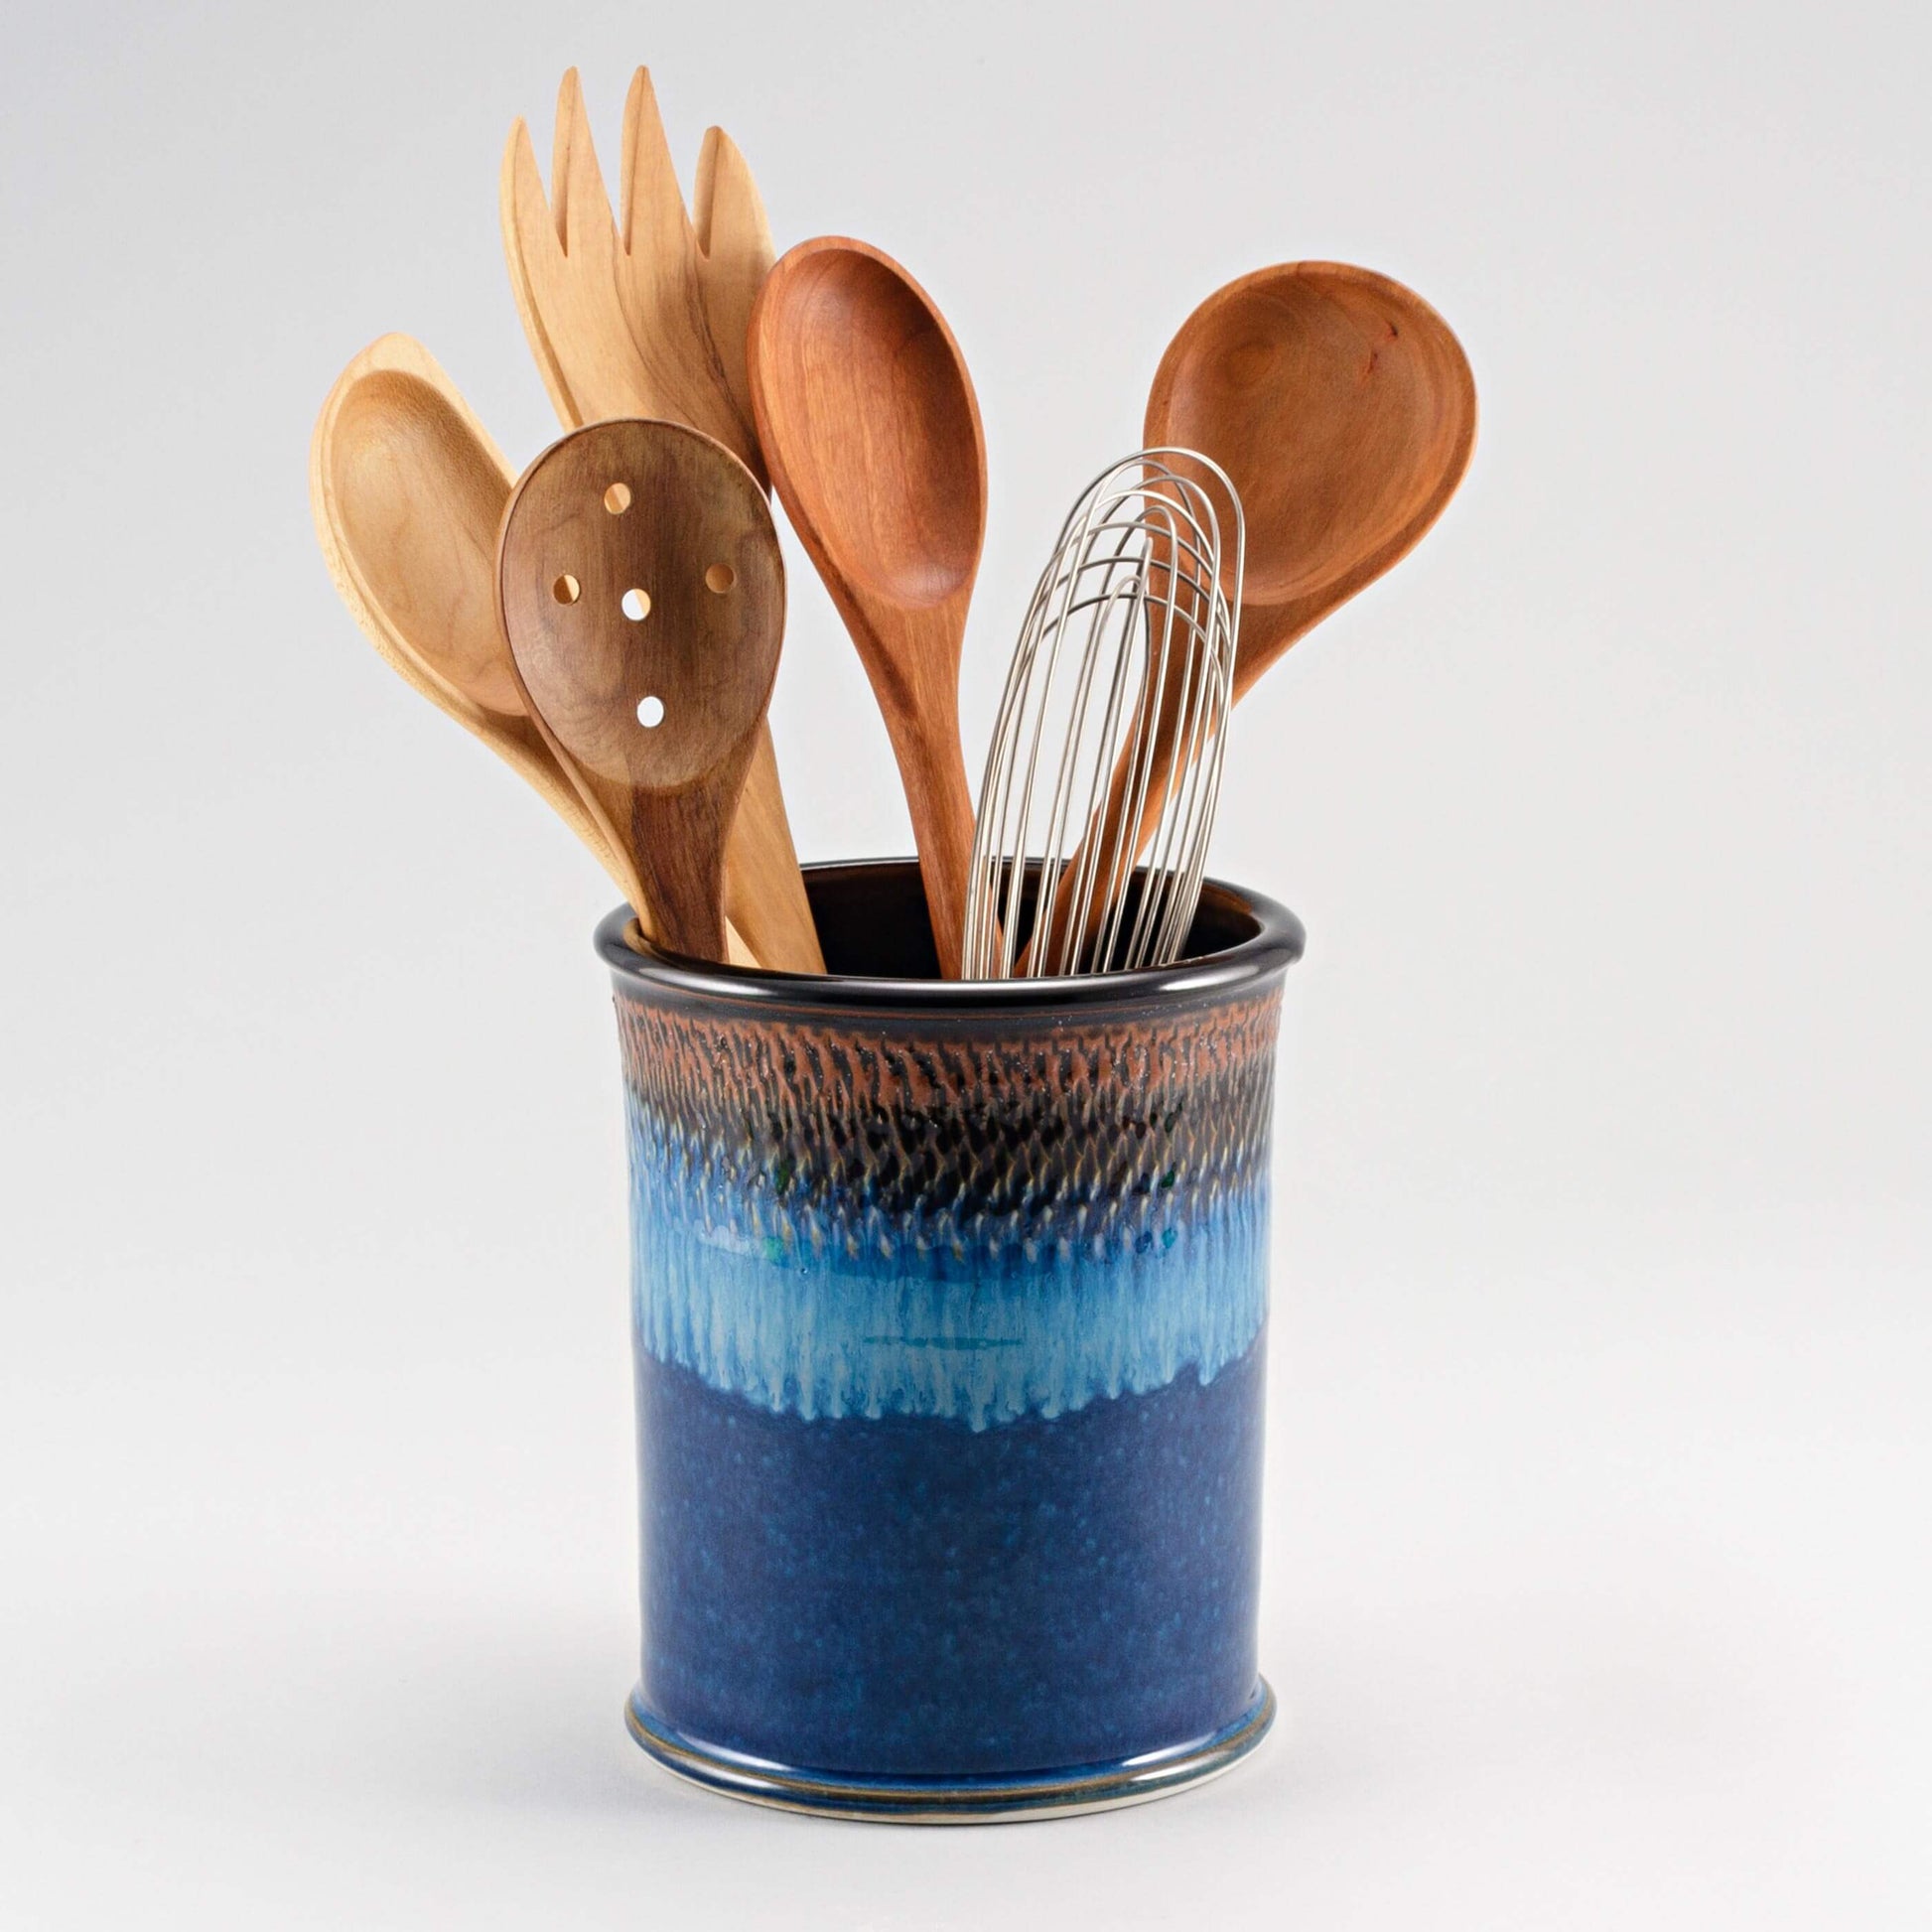 Handmade Pottery Utensil Holder in Blue Hamada pattern made by Georgetown Pottery in Maine